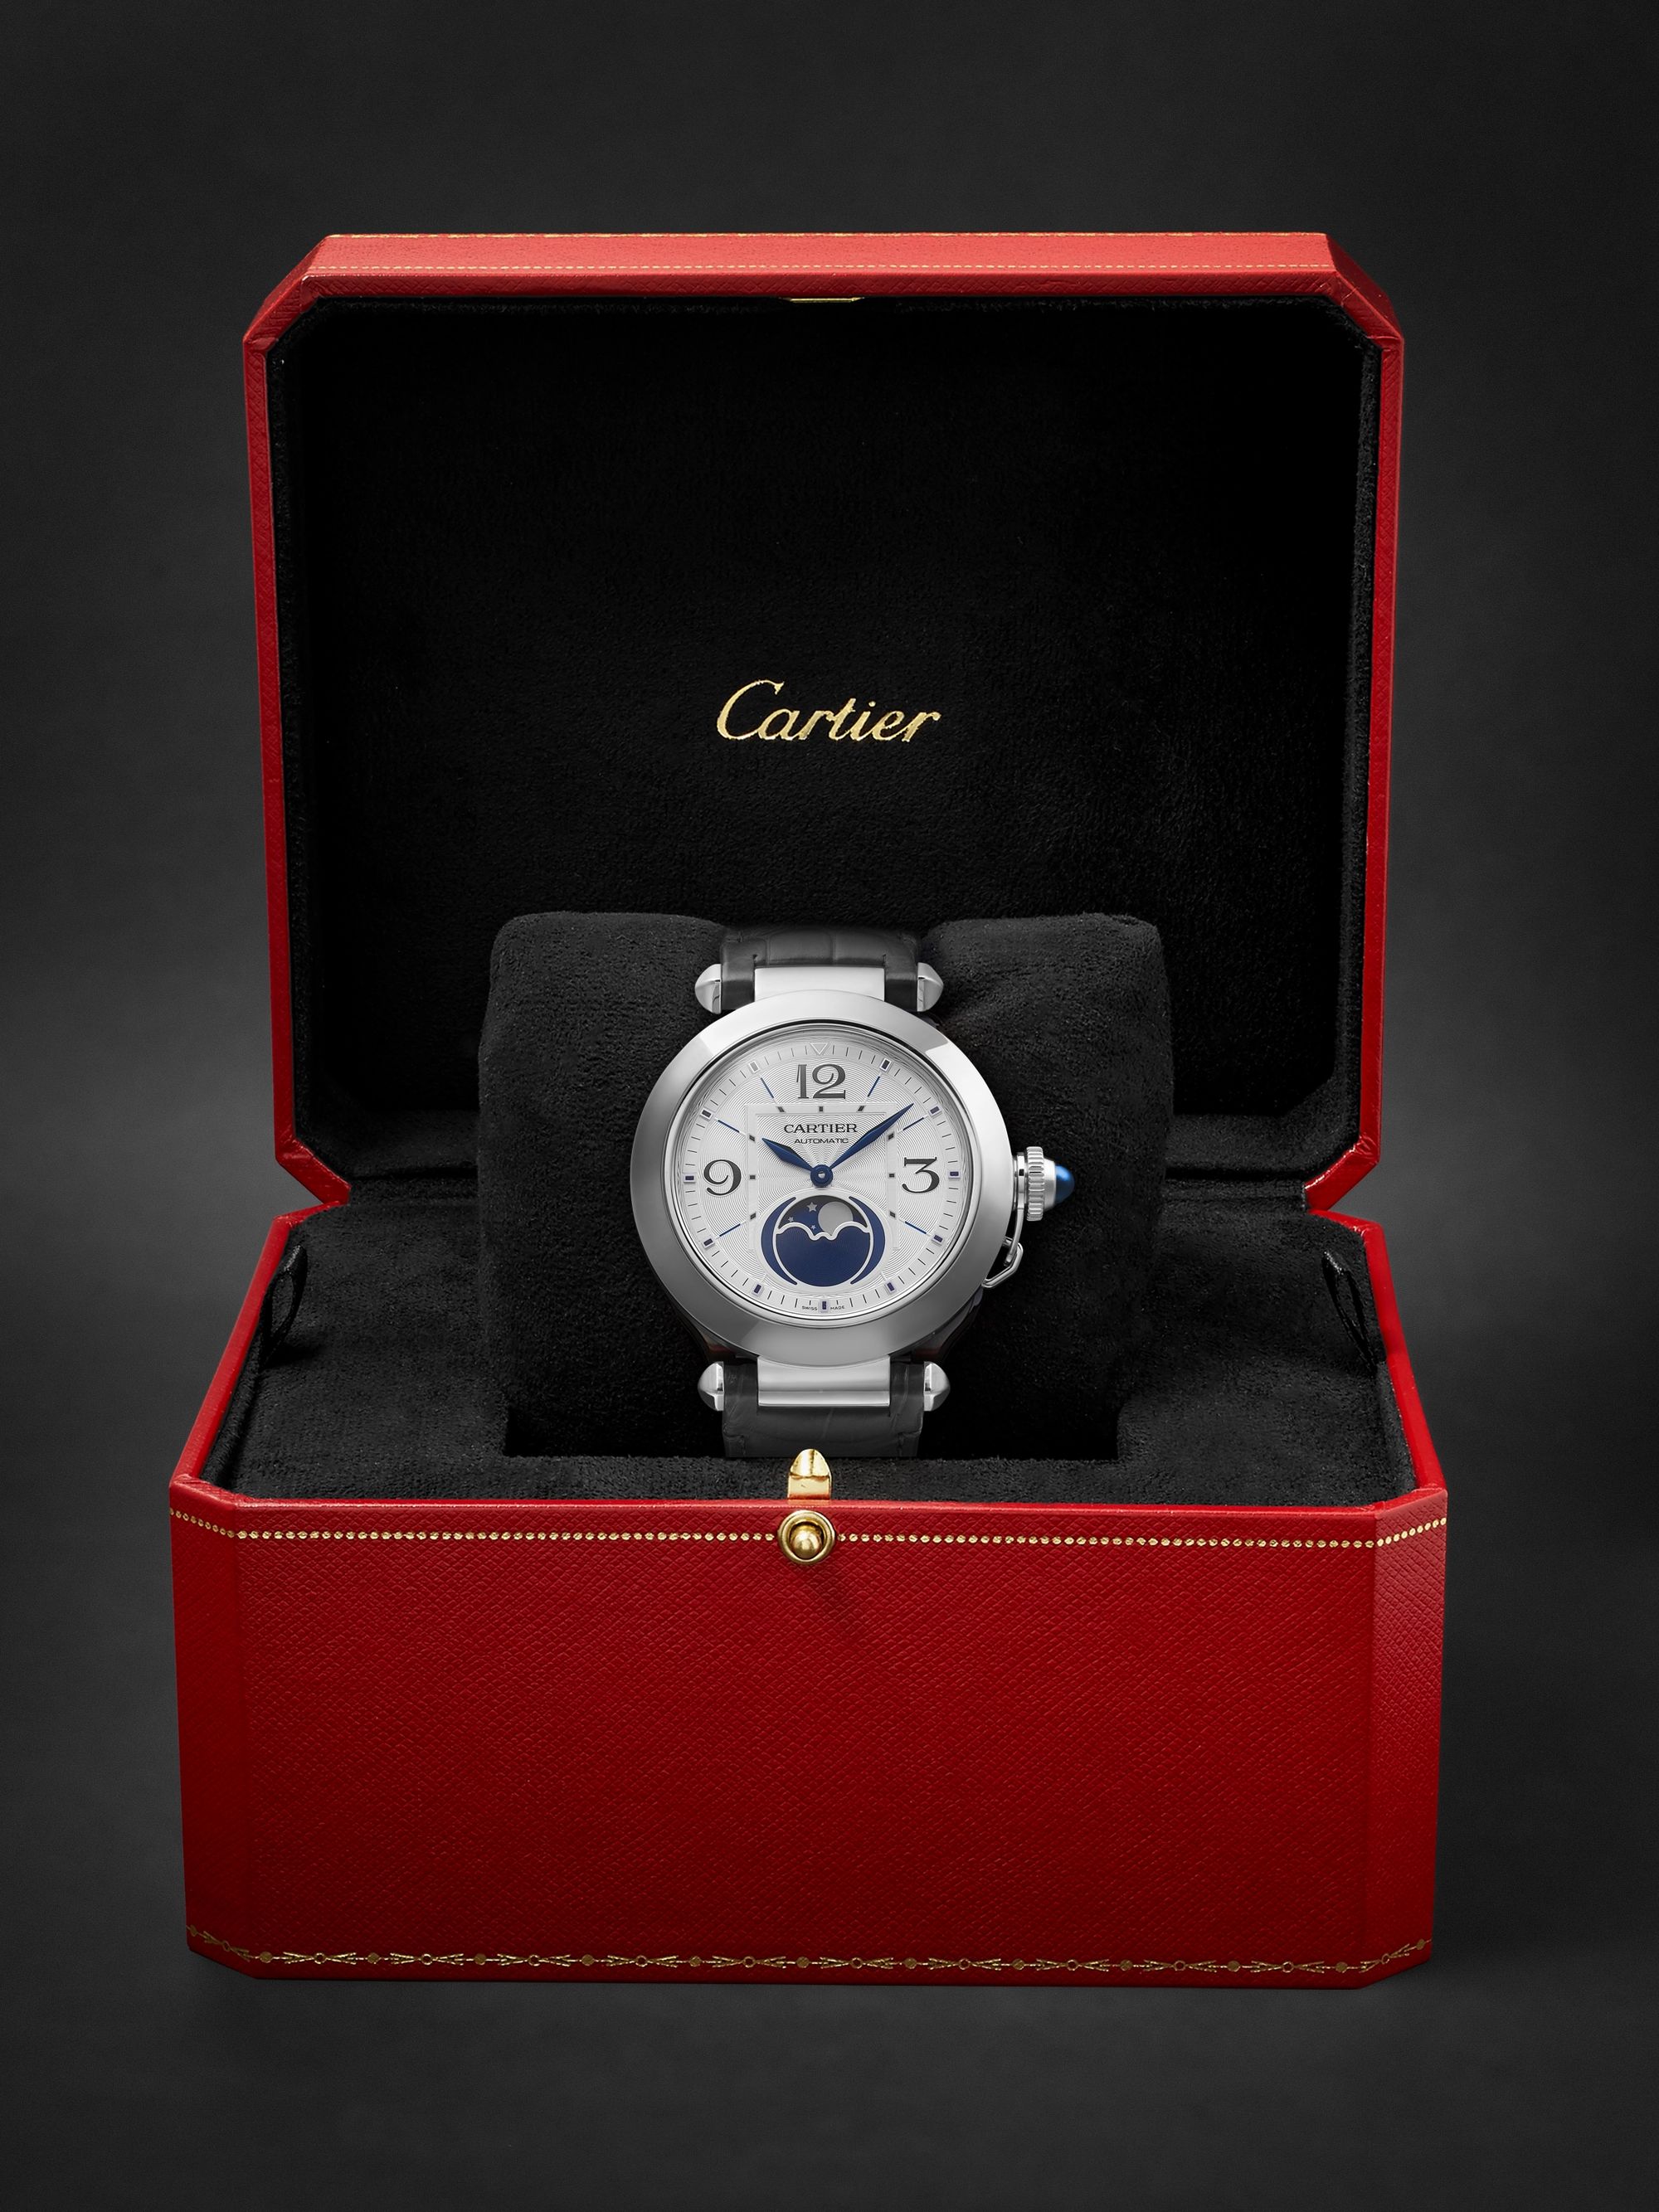 CARTIER Pasha de Cartier Automatic 41mm Stainless Steel and Alligator Watch, Ref. No. WSPA0030